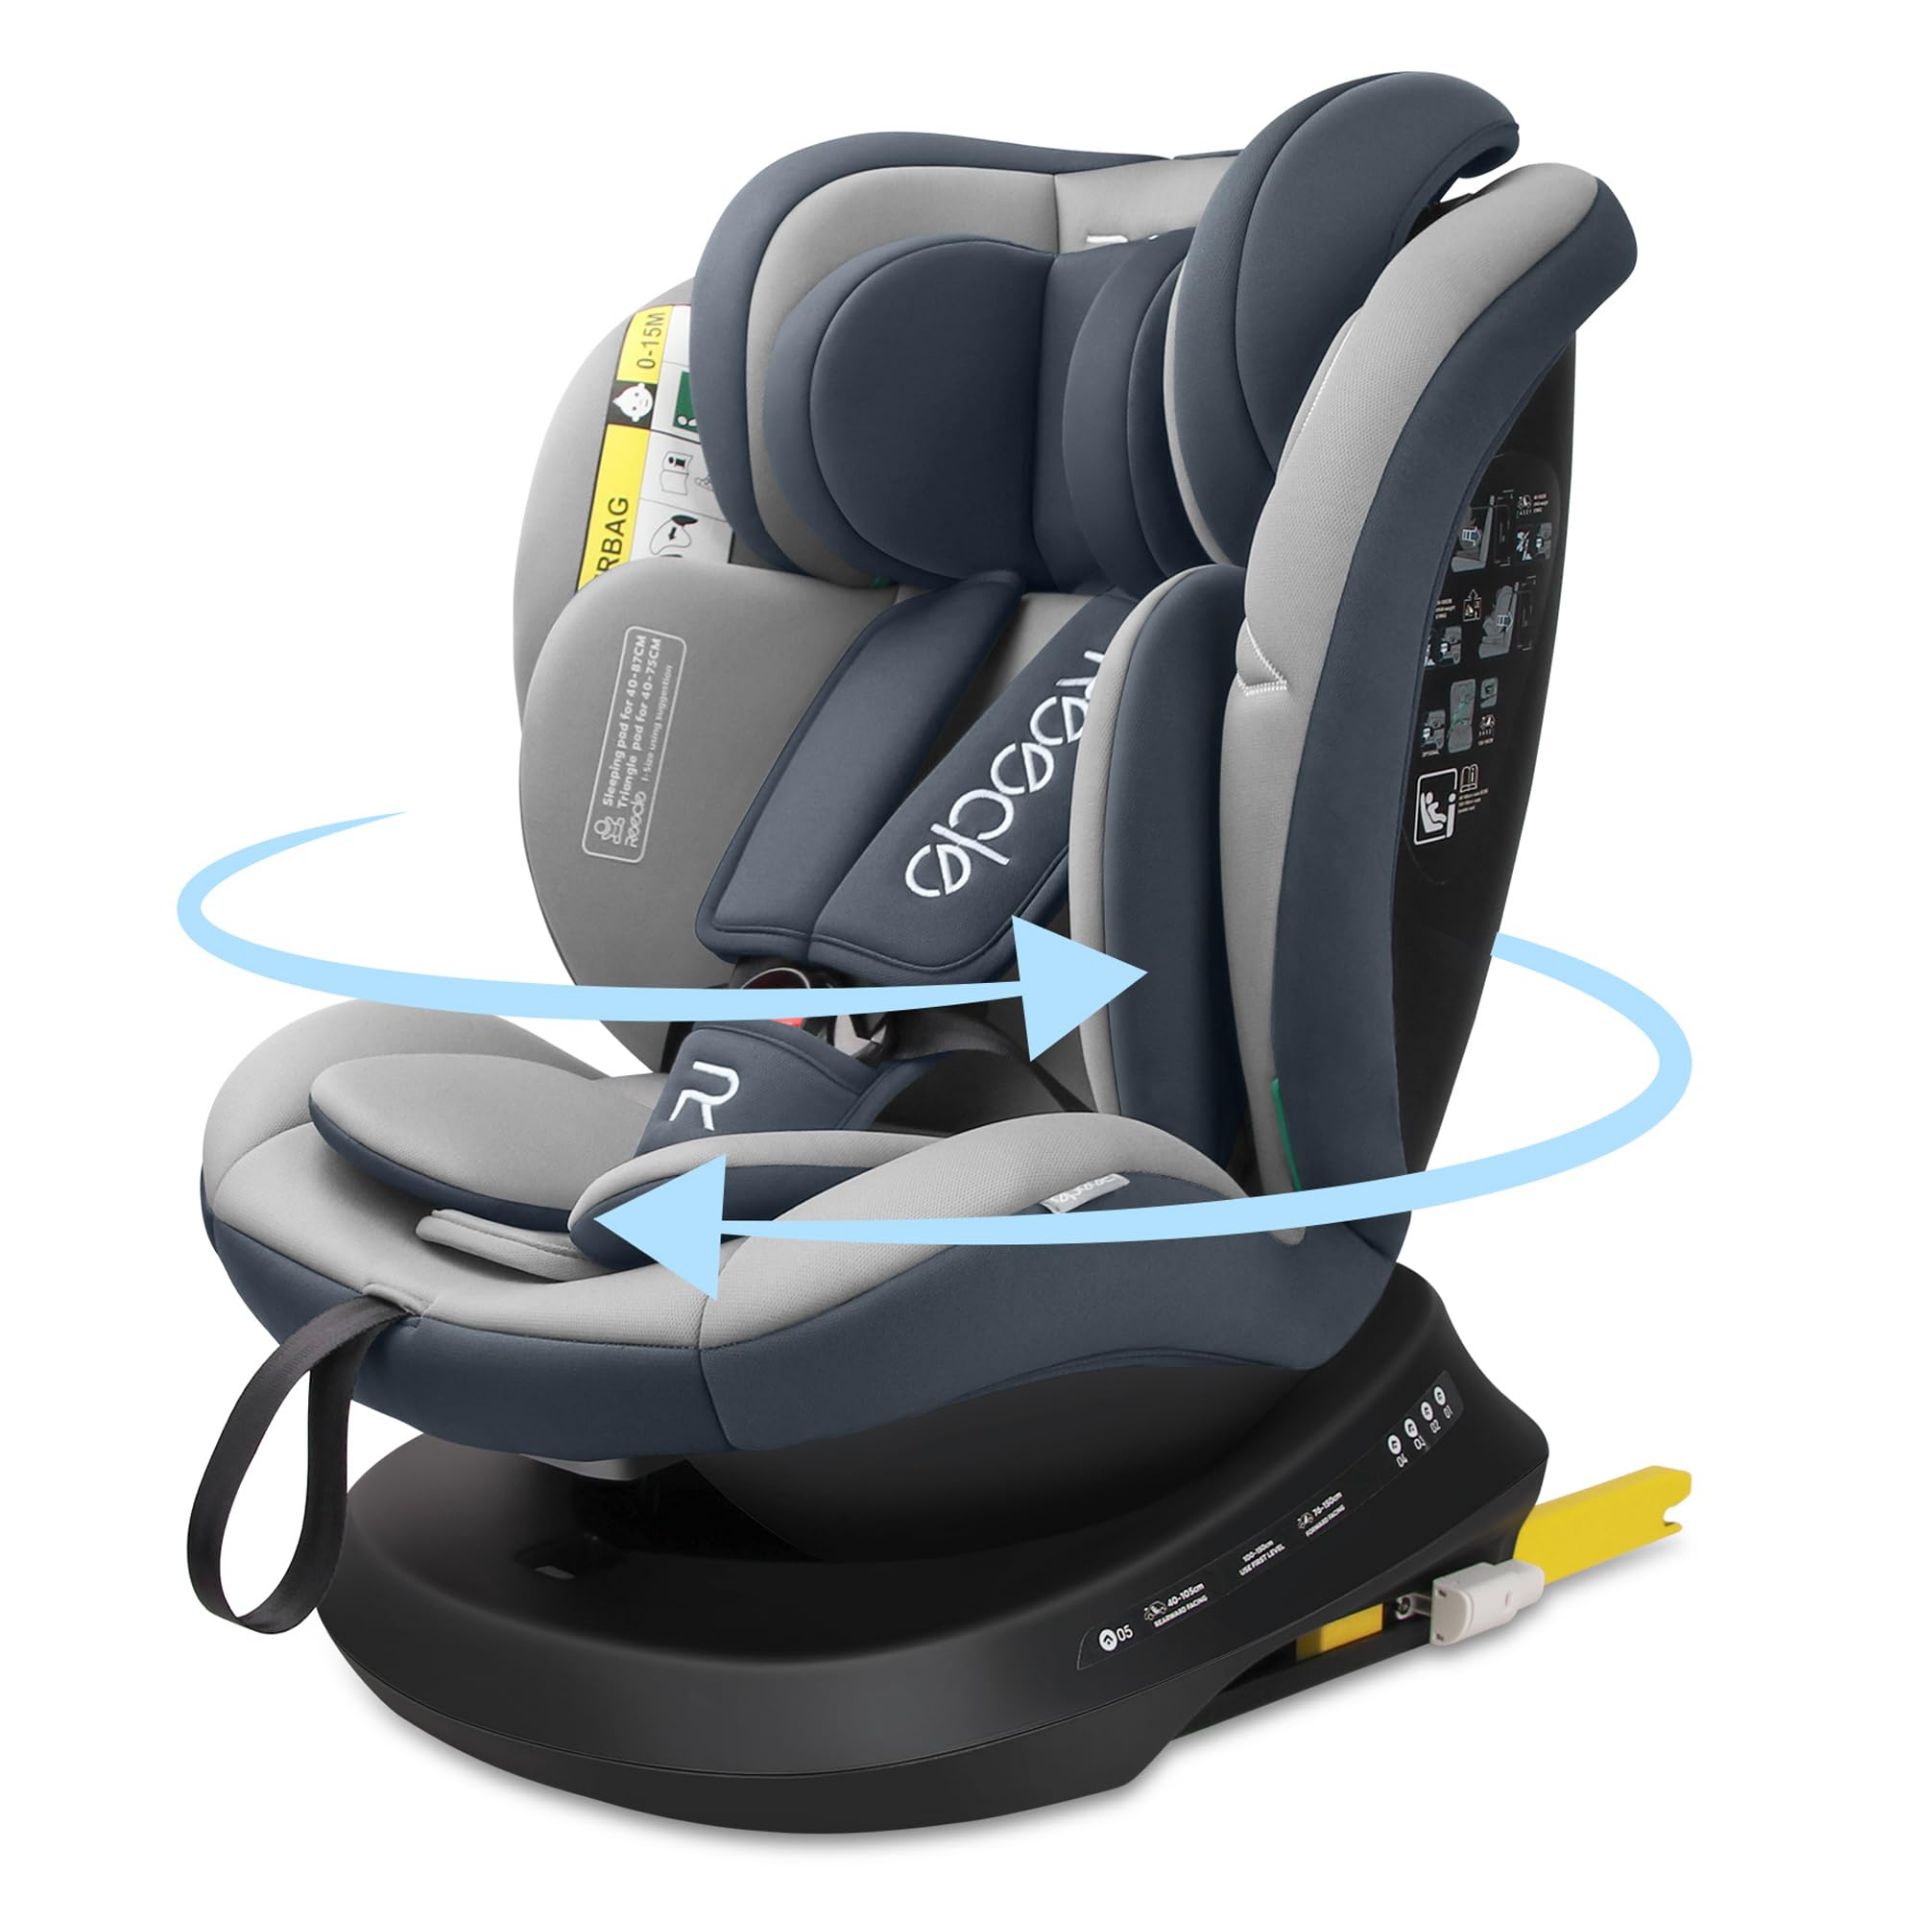 RRP £148.40 Reecle I-Size 360 Swivel Baby Car Seat with ISOFIX